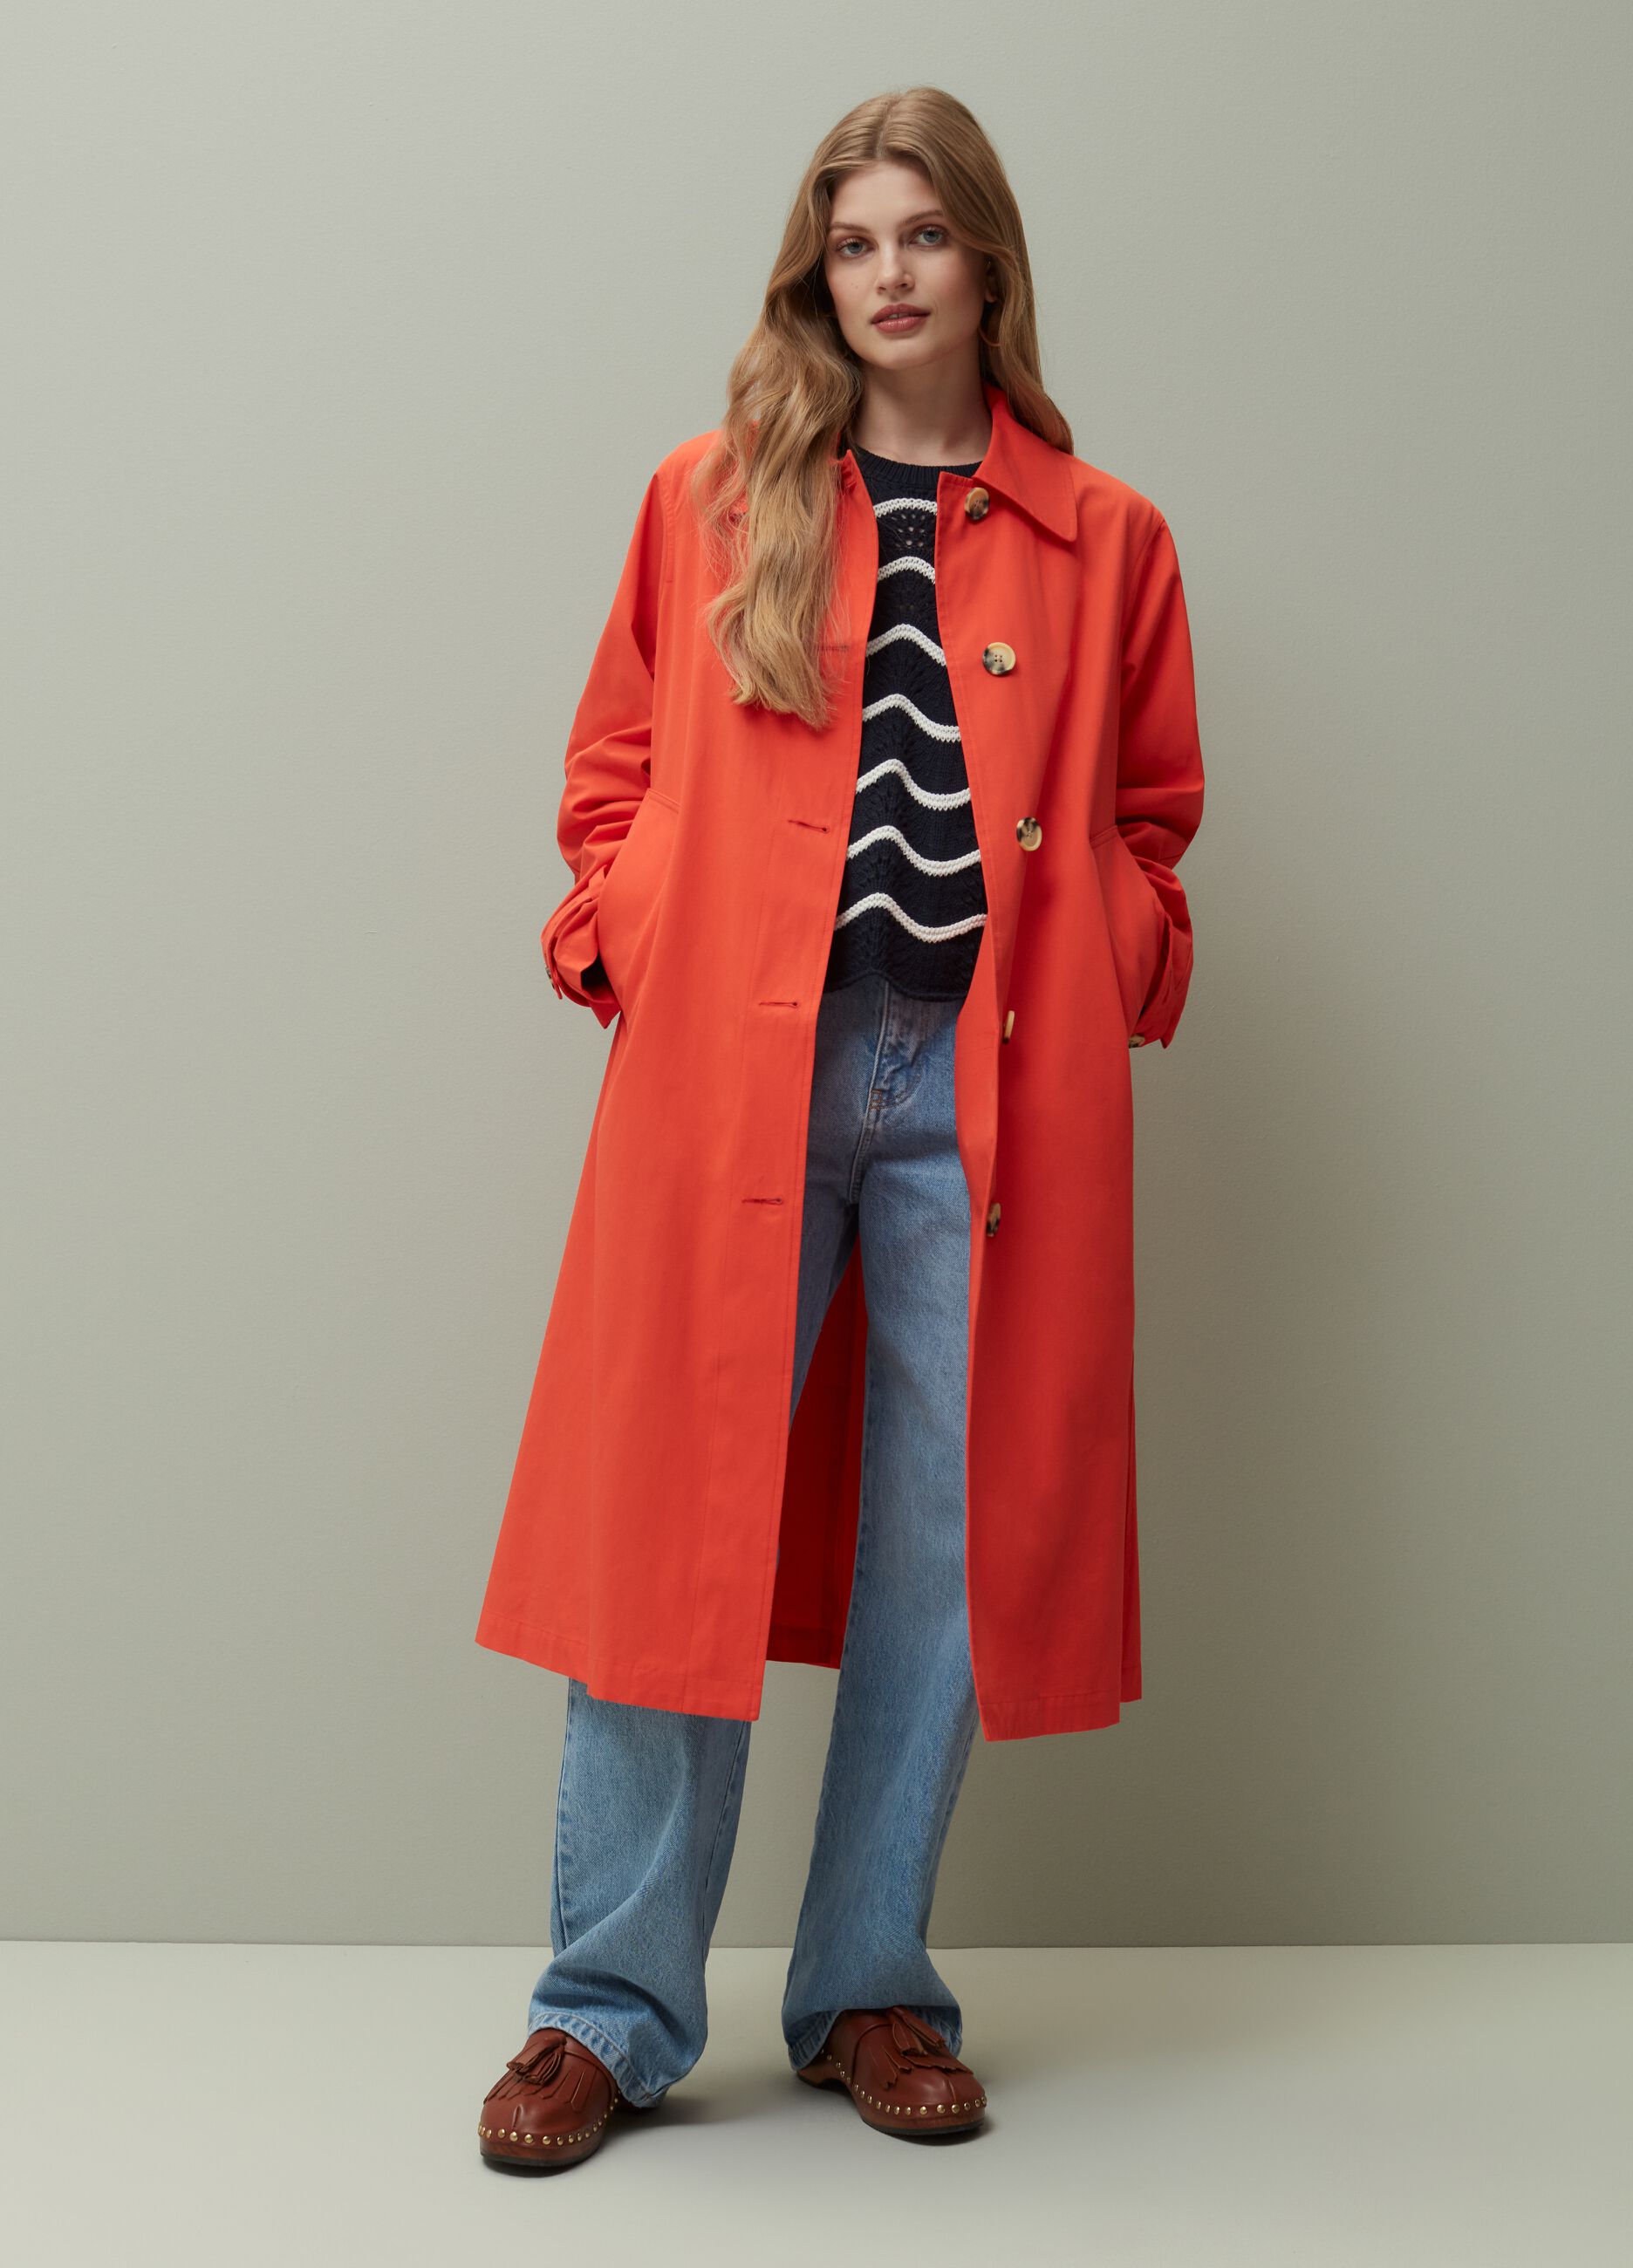 Long jacket with striped buttons